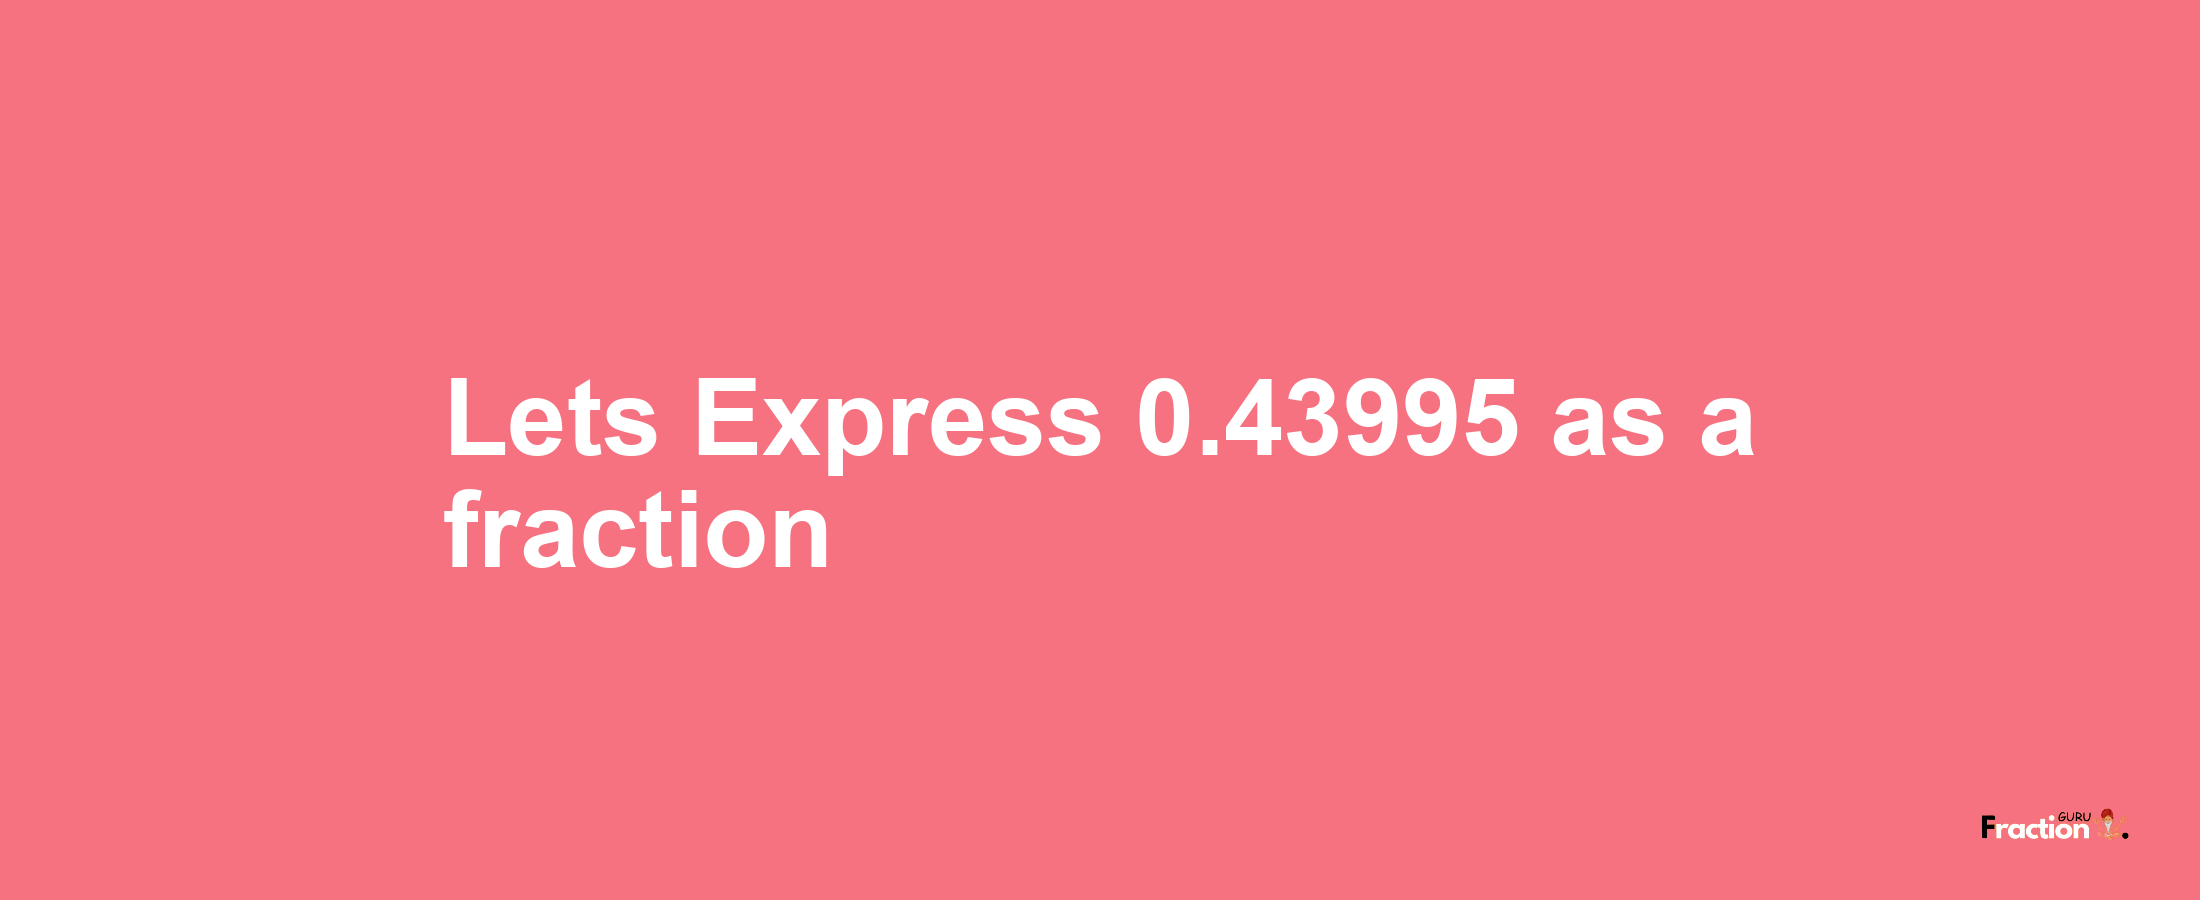 Lets Express 0.43995 as afraction